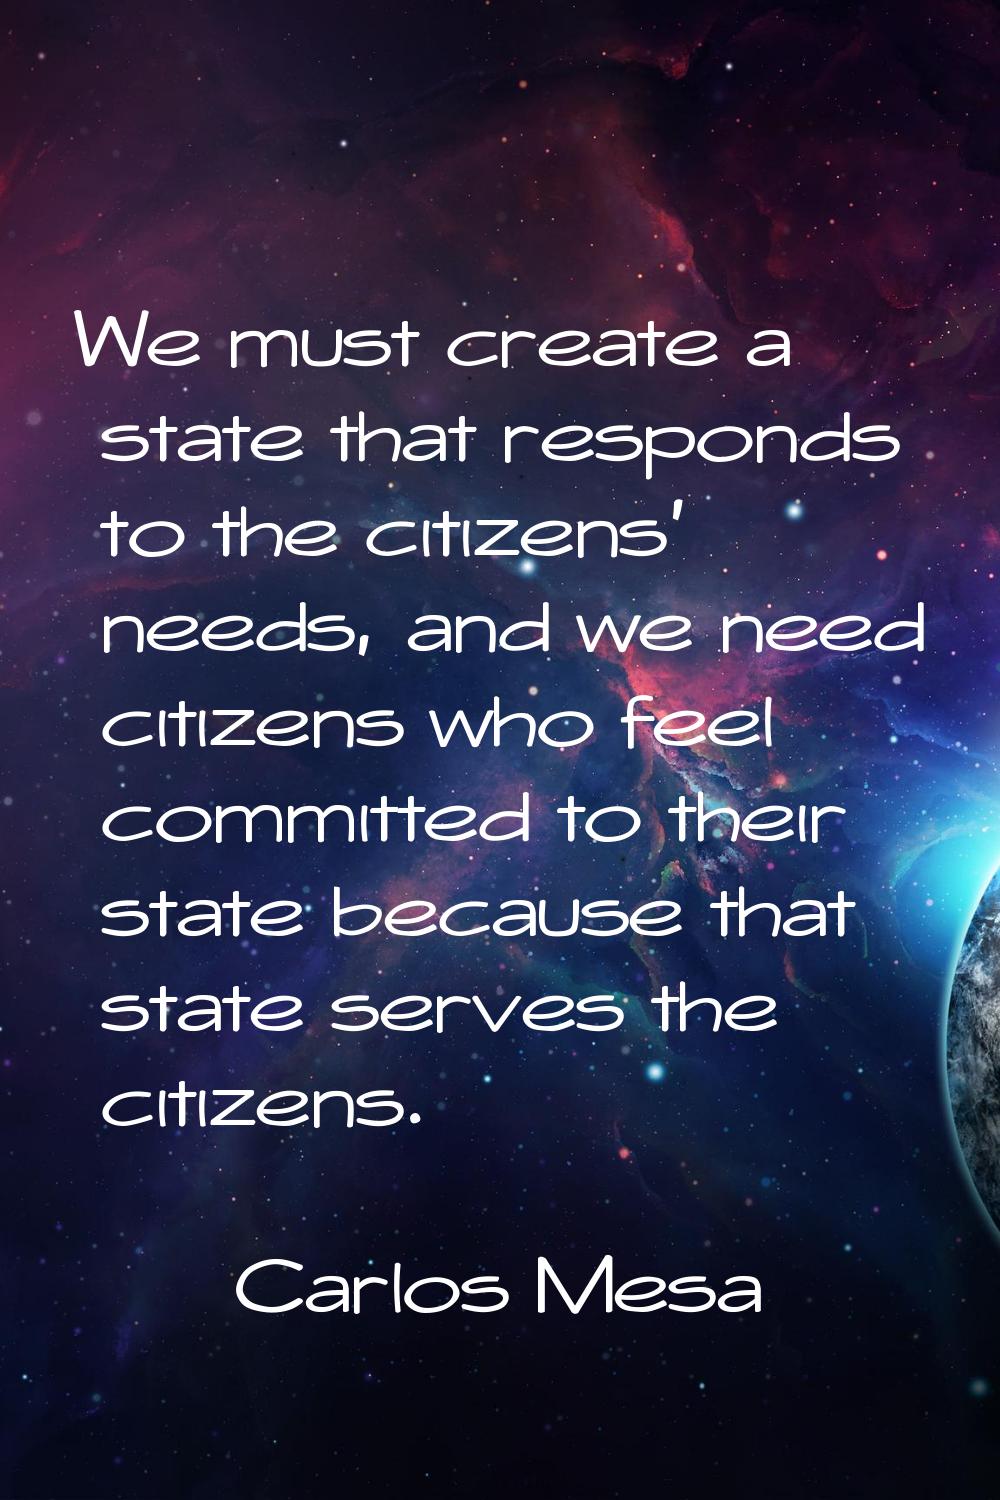 We must create a state that responds to the citizens' needs, and we need citizens who feel committe